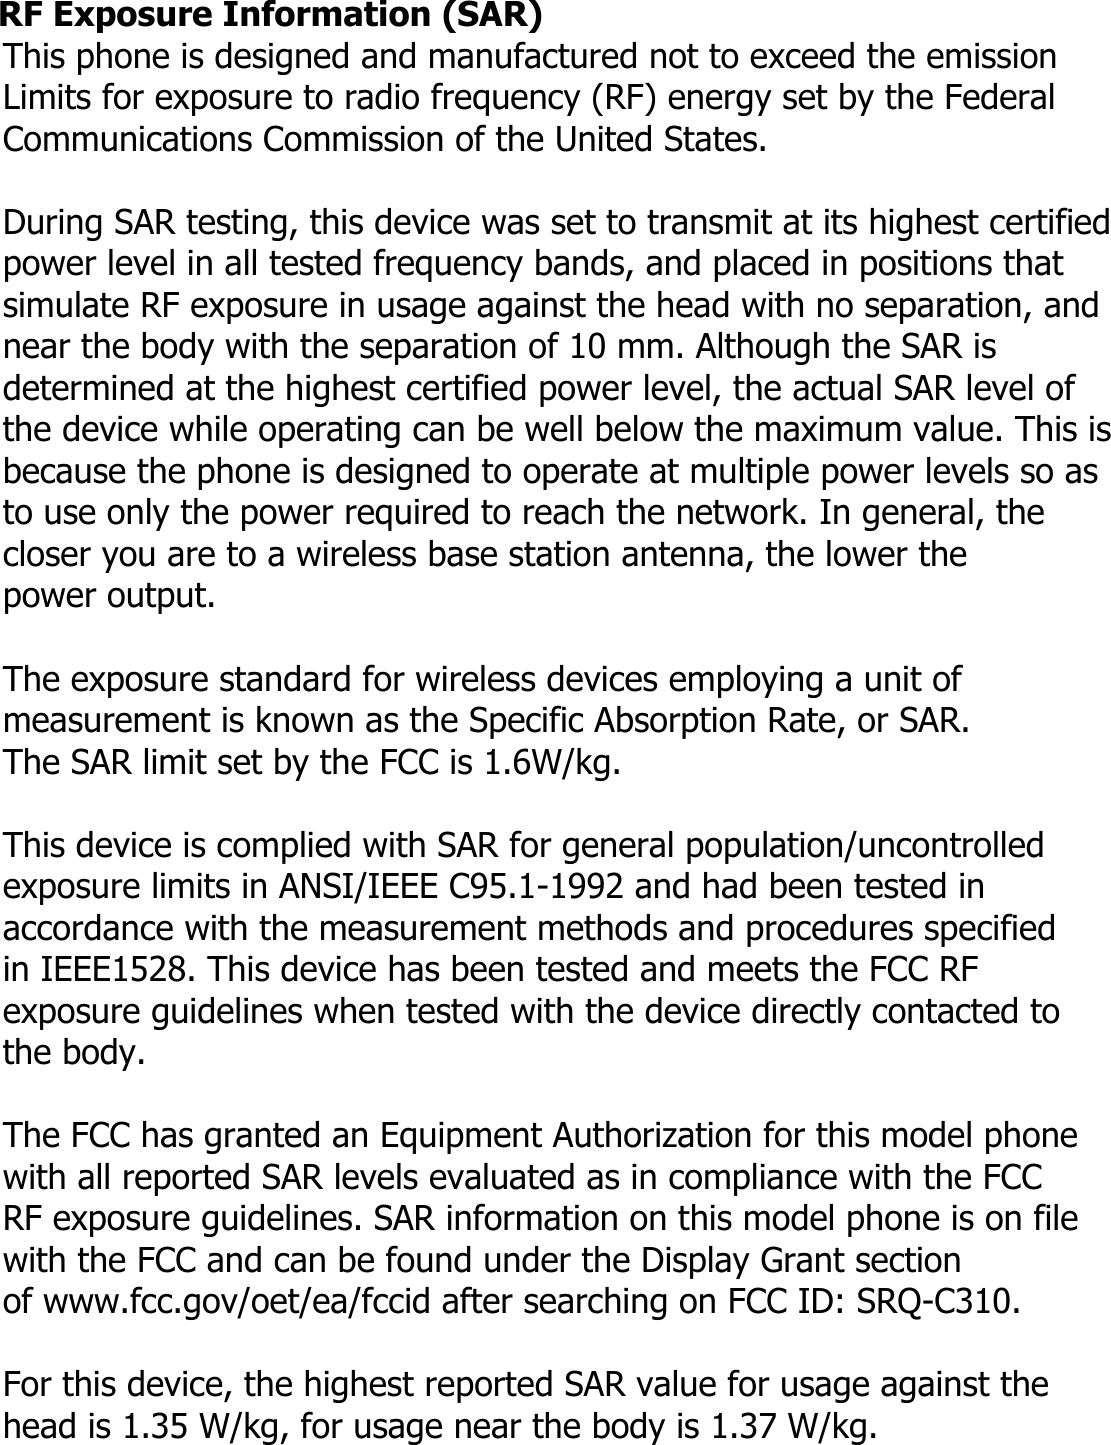  RF Exposure Information (SAR) This phone is designed and manufactured not to exceed the emission   Limits for exposure to radio frequency (RF) energy set by the Federal Communications Commission of the United States.    During SAR testing, this device was set to transmit at its highest certified power level in all tested frequency bands, and placed in positions that simulate RF exposure in usage against the head with no separation, and near the body with the separation of 10 mm. Although the SAR is determined at the highest certified power level, the actual SAR level of   the device while operating can be well below the maximum value. This is because the phone is designed to operate at multiple power levels so as   to use only the power required to reach the network. In general, the   closer you are to a wireless base station antenna, the lower the   power output.  The exposure standard for wireless devices employing a unit of measurement is known as the Specific Absorption Rate, or SAR.  The SAR limit set by the FCC is 1.6W/kg.   This device is complied with SAR for general population/uncontrolled exposure limits in ANSI/IEEE C95.1-1992 and had been tested in   accordance with the measurement methods and procedures specified   in IEEE1528. This device has been tested and meets the FCC RF   exposure guidelines when tested with the device directly contacted to   the body.    The FCC has granted an Equipment Authorization for this model phone   with all reported SAR levels evaluated as in compliance with the FCC   RF exposure guidelines. SAR information on this model phone is on file   with the FCC and can be found under the Display Grant section   of www.fcc.gov/oet/ea/fccid after searching on FCC ID: SRQ-C310.  For this device, the highest reported SAR value for usage against the   head is 1.35 W/kg, for usage near the body is 1.37 W/kg. 